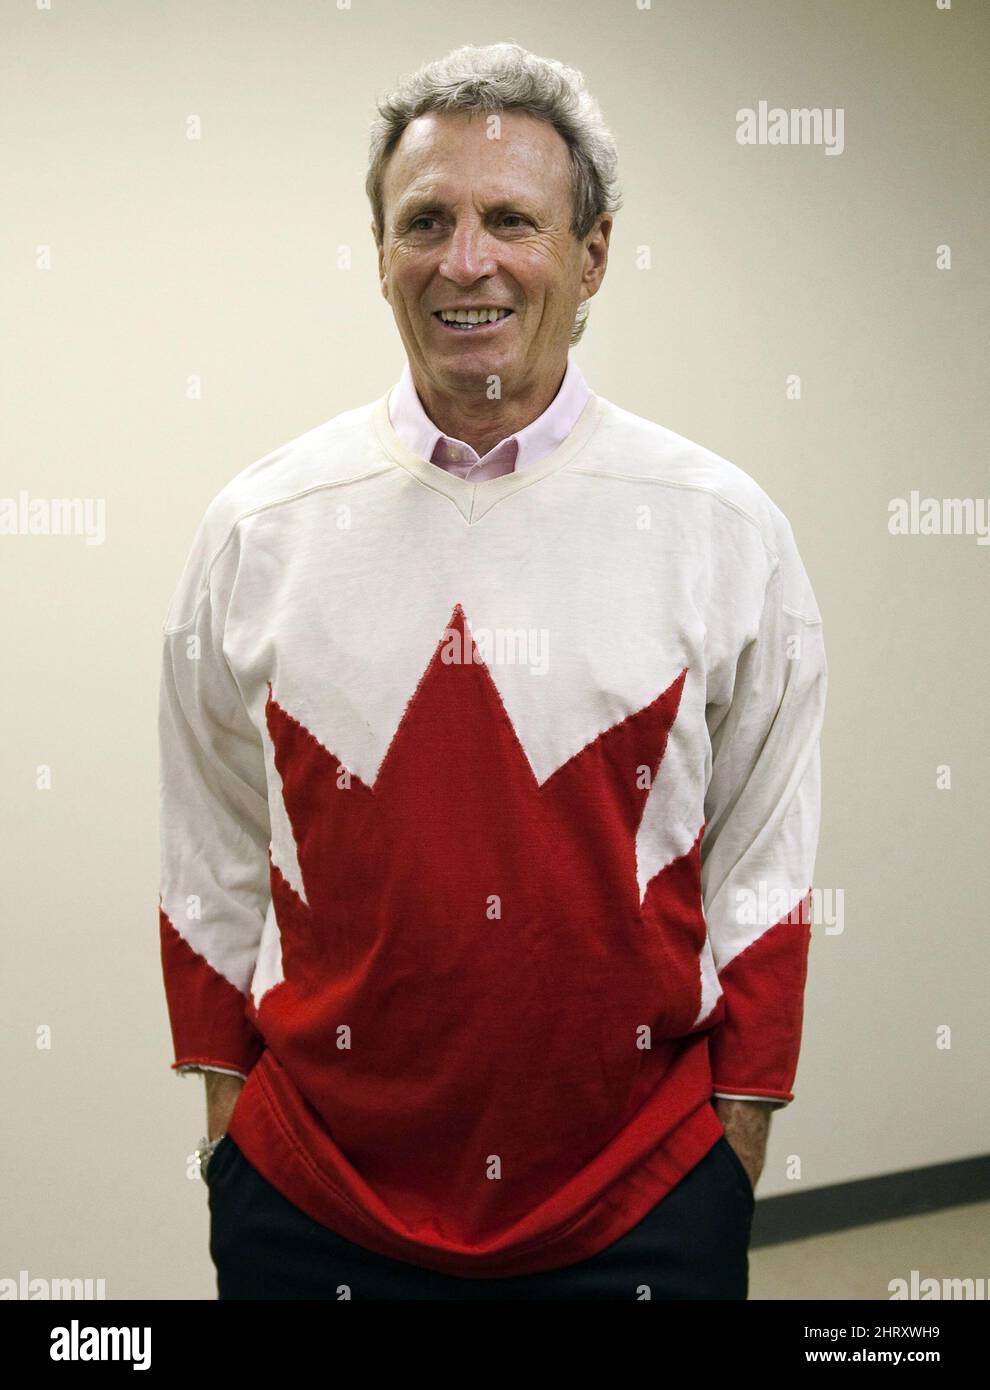 Paul Henderson's famous jersey displaces at the Bell Center